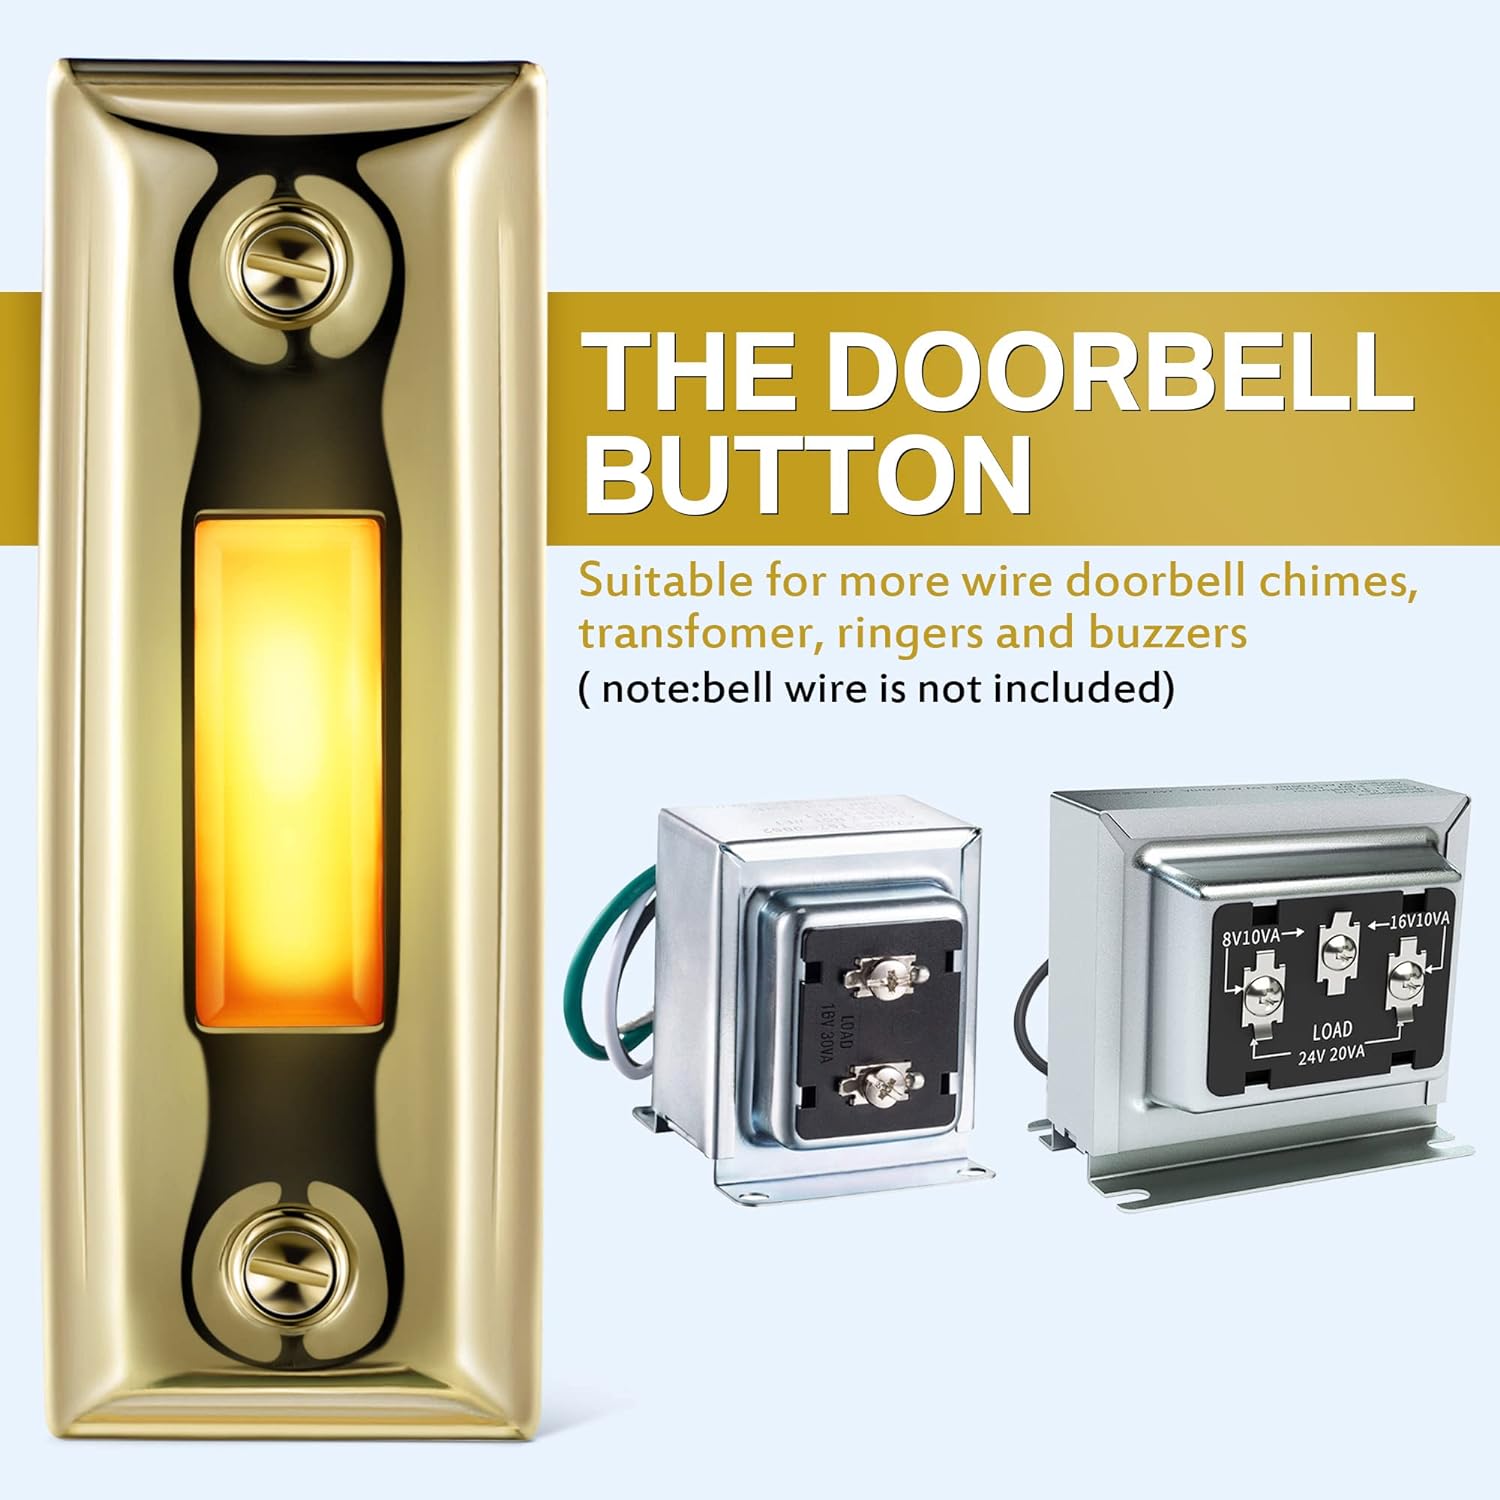 LED Lighted Doorbell Button, Upgraded Solid and Sleek Metal Wall Mounted Door Bell Push Buttons for Home, Universal Garage Door Opener Switch (Gold)